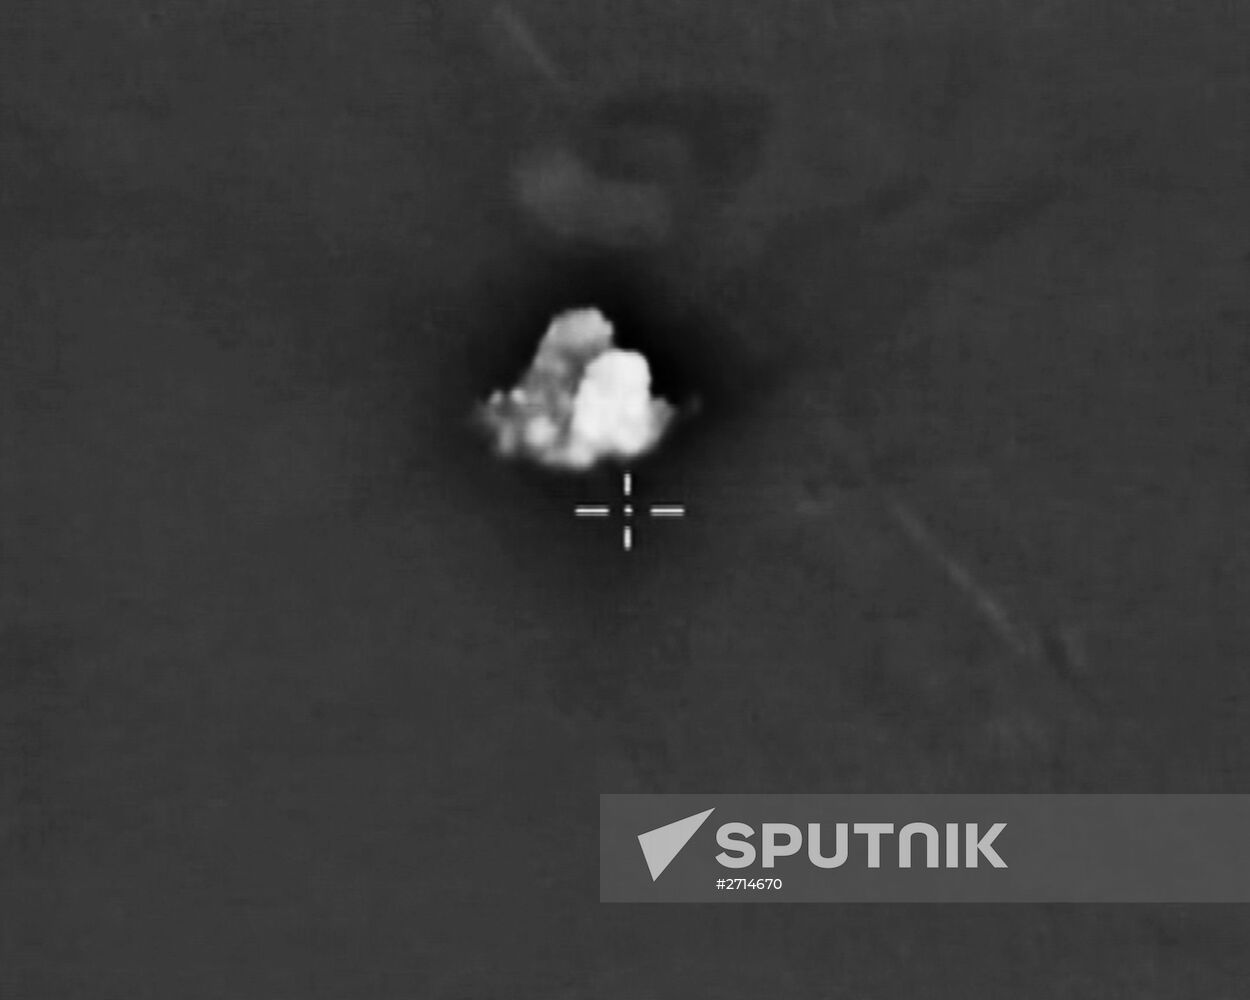 Russian Air Force strikes Islamic State oisitions in Syria